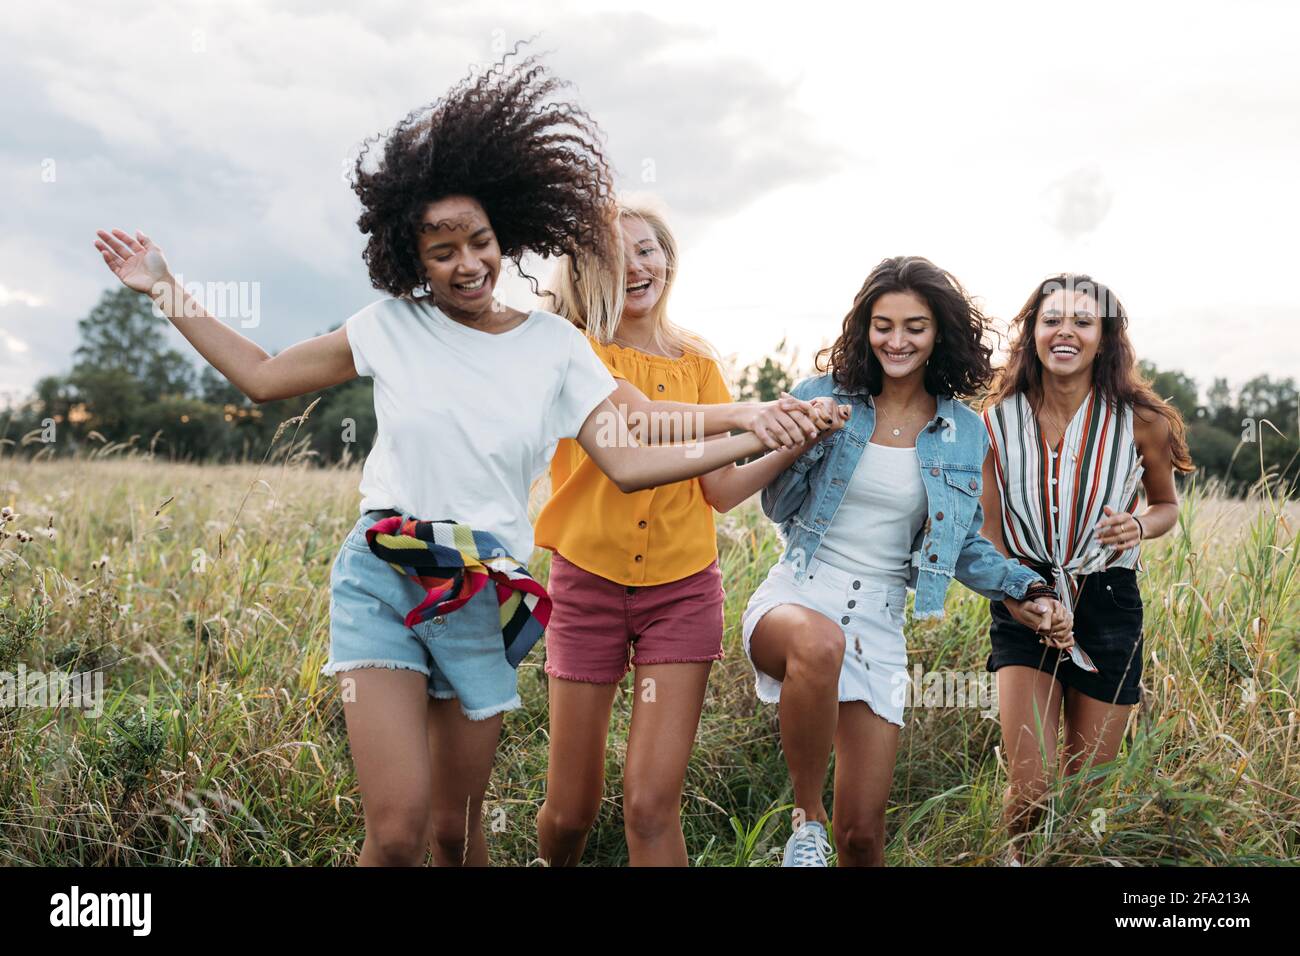 Four happy women hold hands and running on a field. Female friends having good times outdoors. Stock Photo